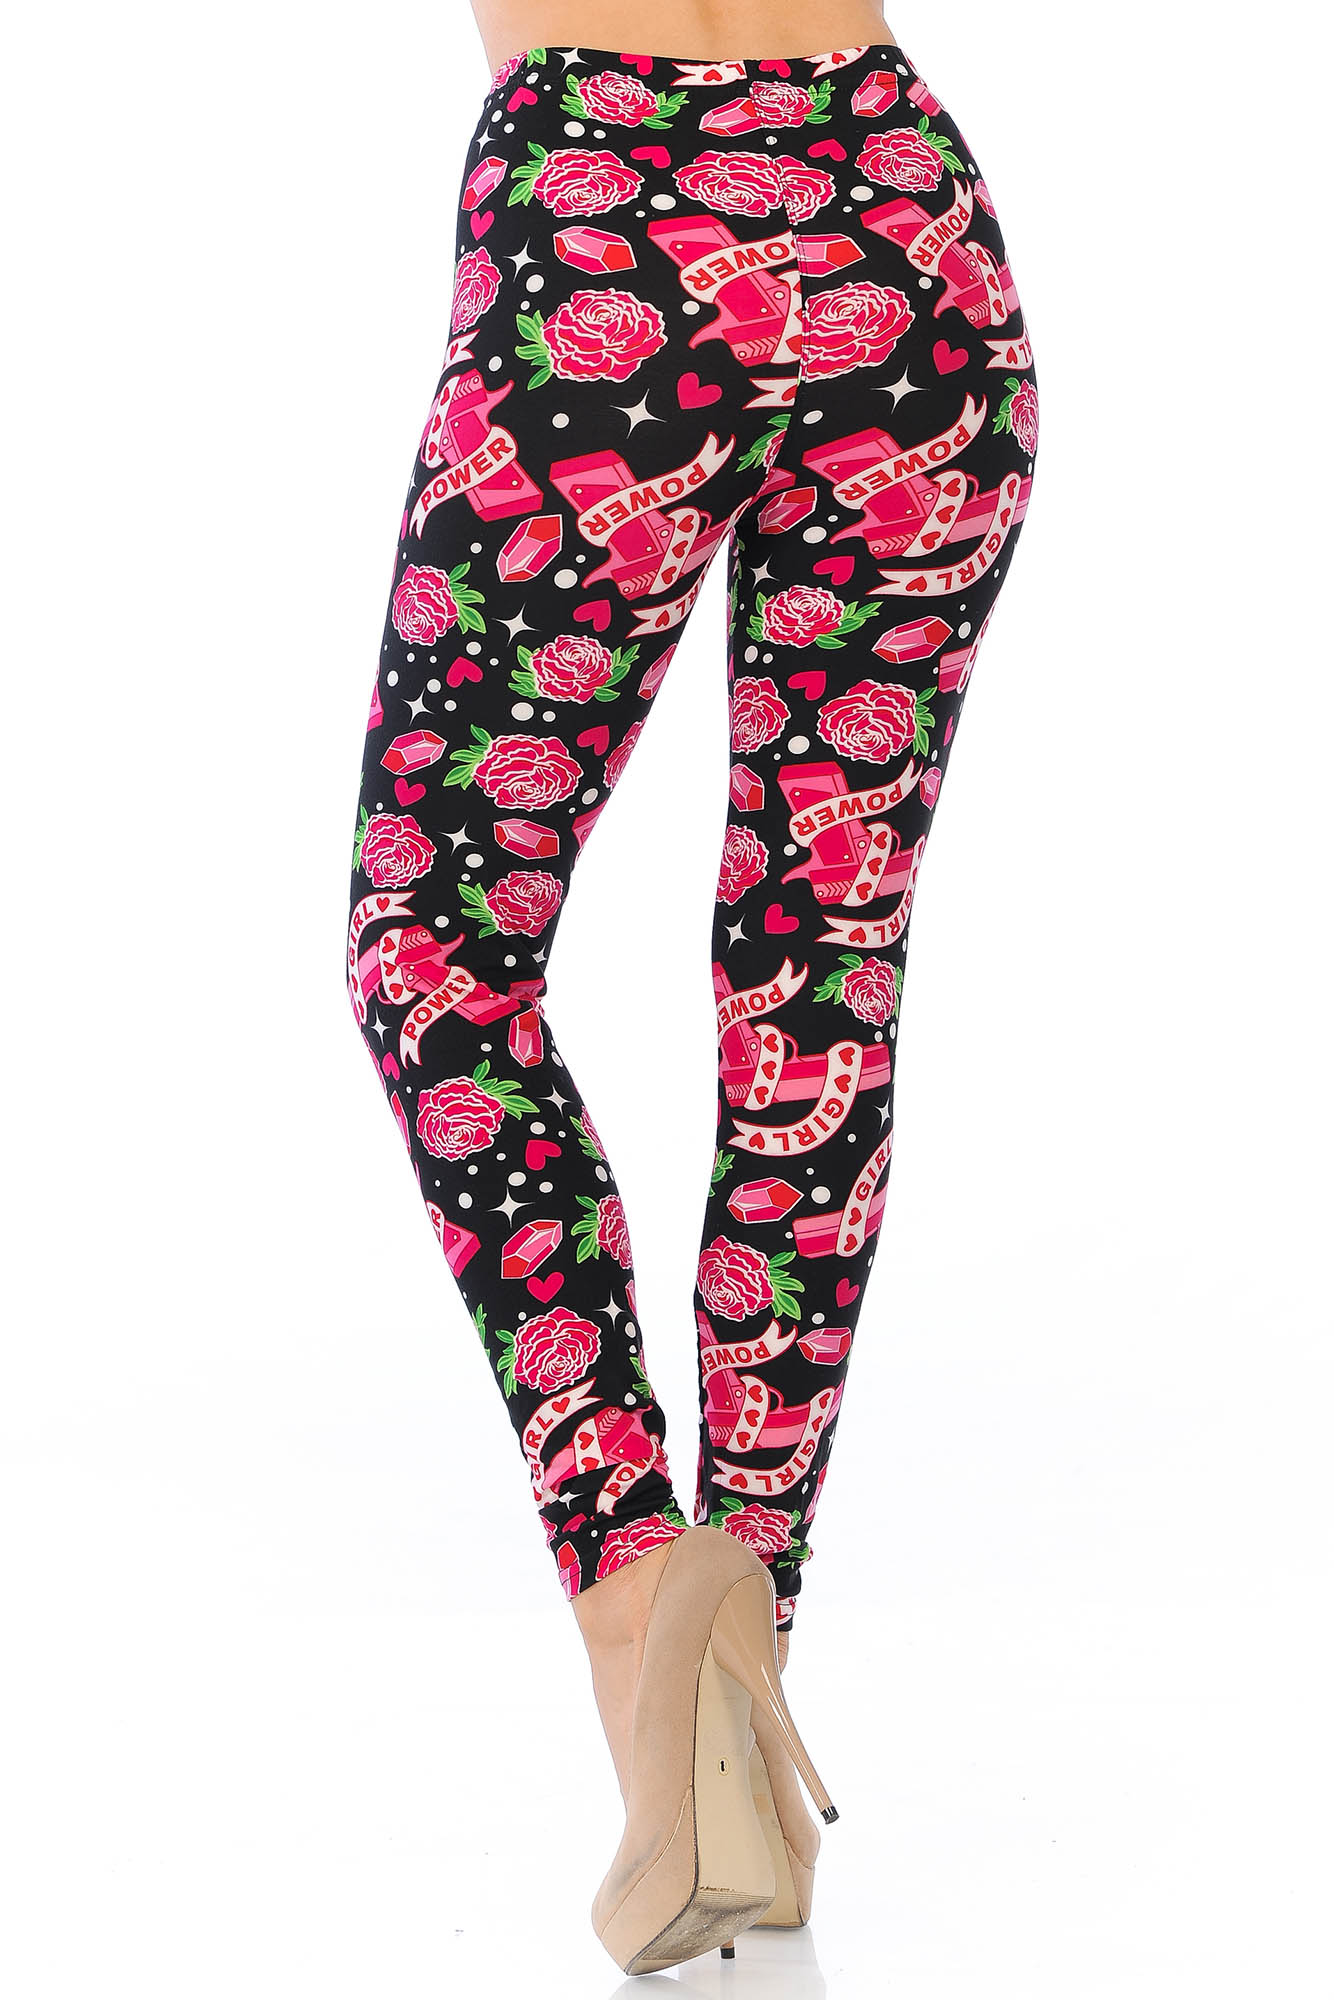 Wholesale Buttery Smooth Girl Power Leggings